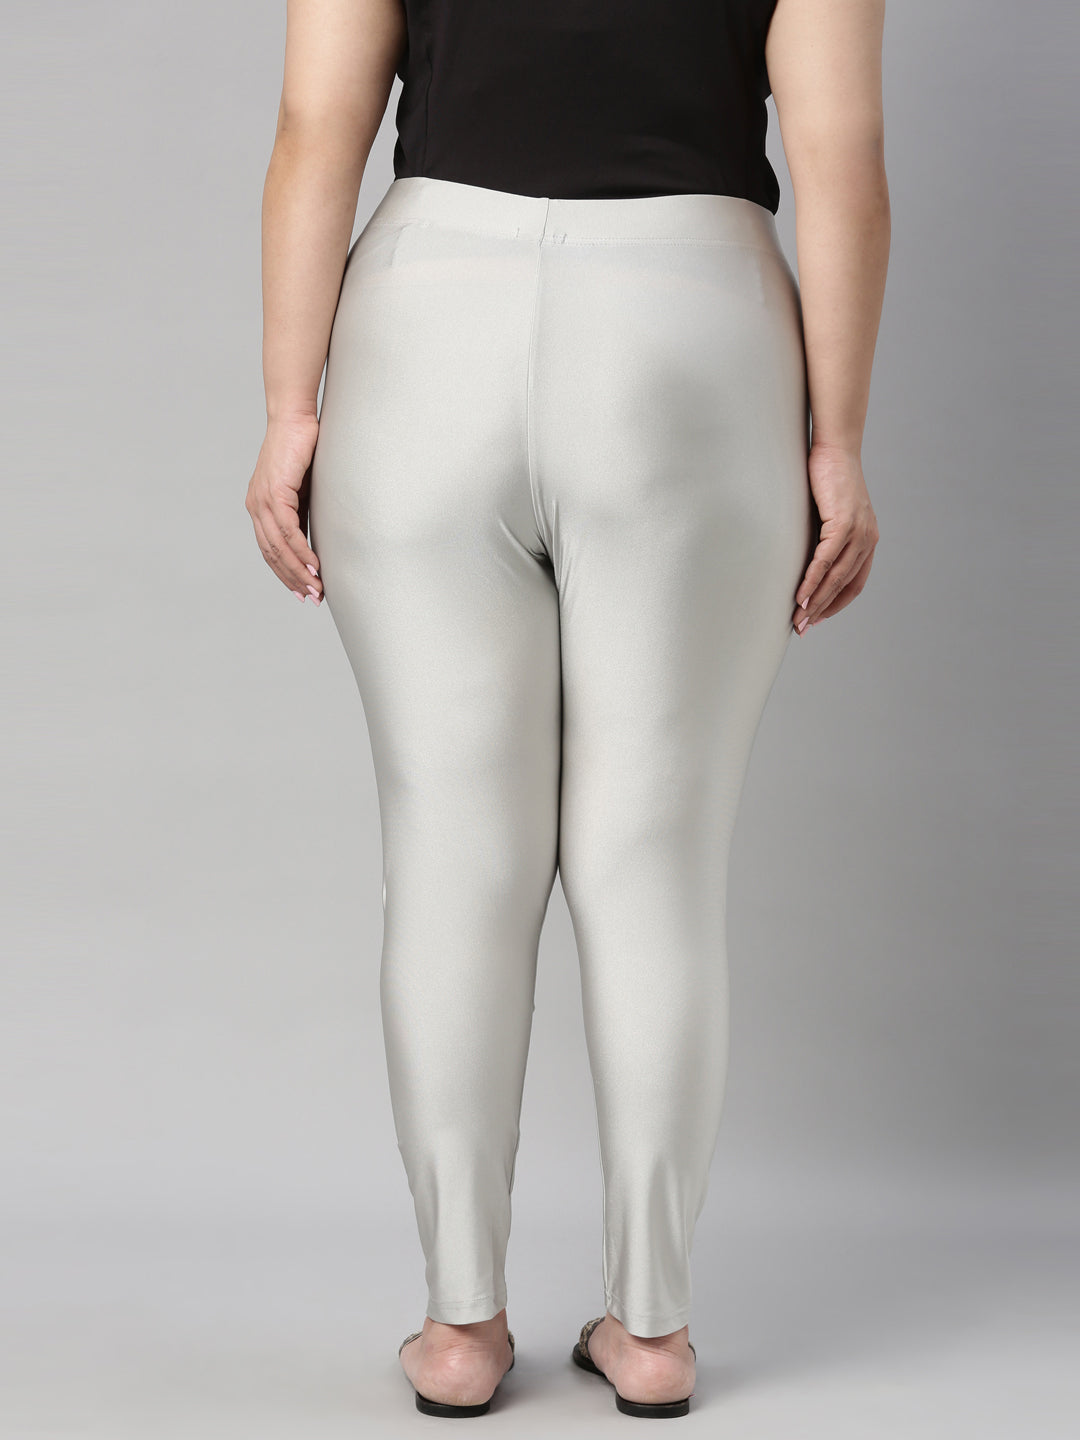 Buy Silver Holographic High Waist Leggings 152181 Online in India - Etsy